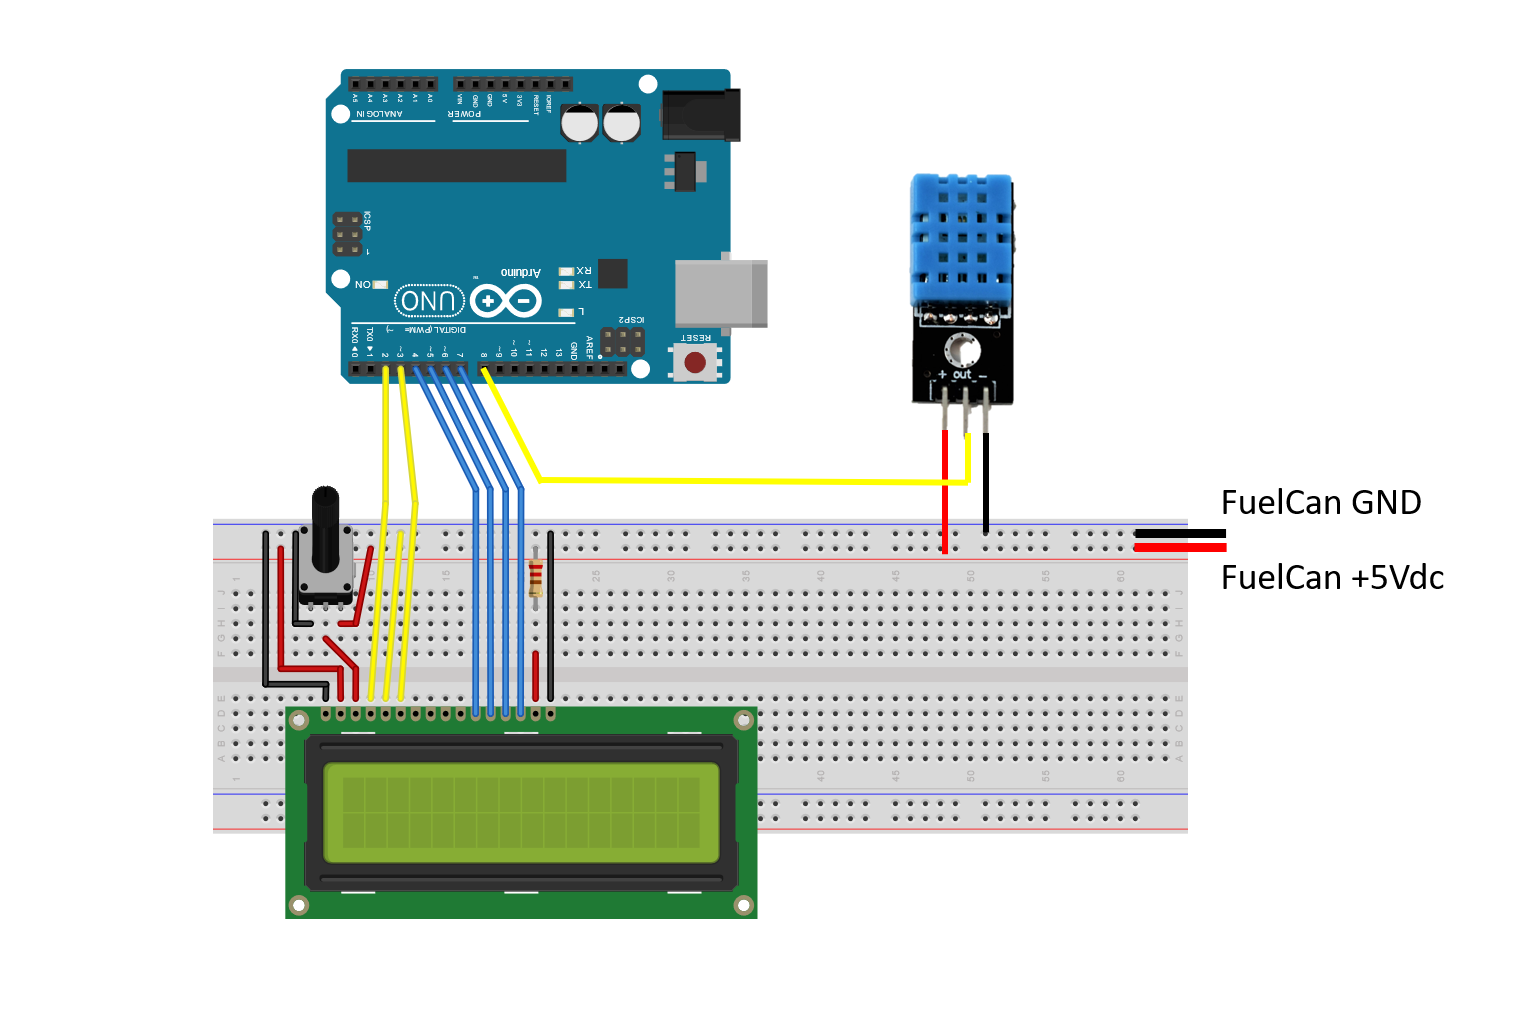 https://hackster.imgix.net/uploads/attachments/941594/circuit_schematic_50UewknW4d.png